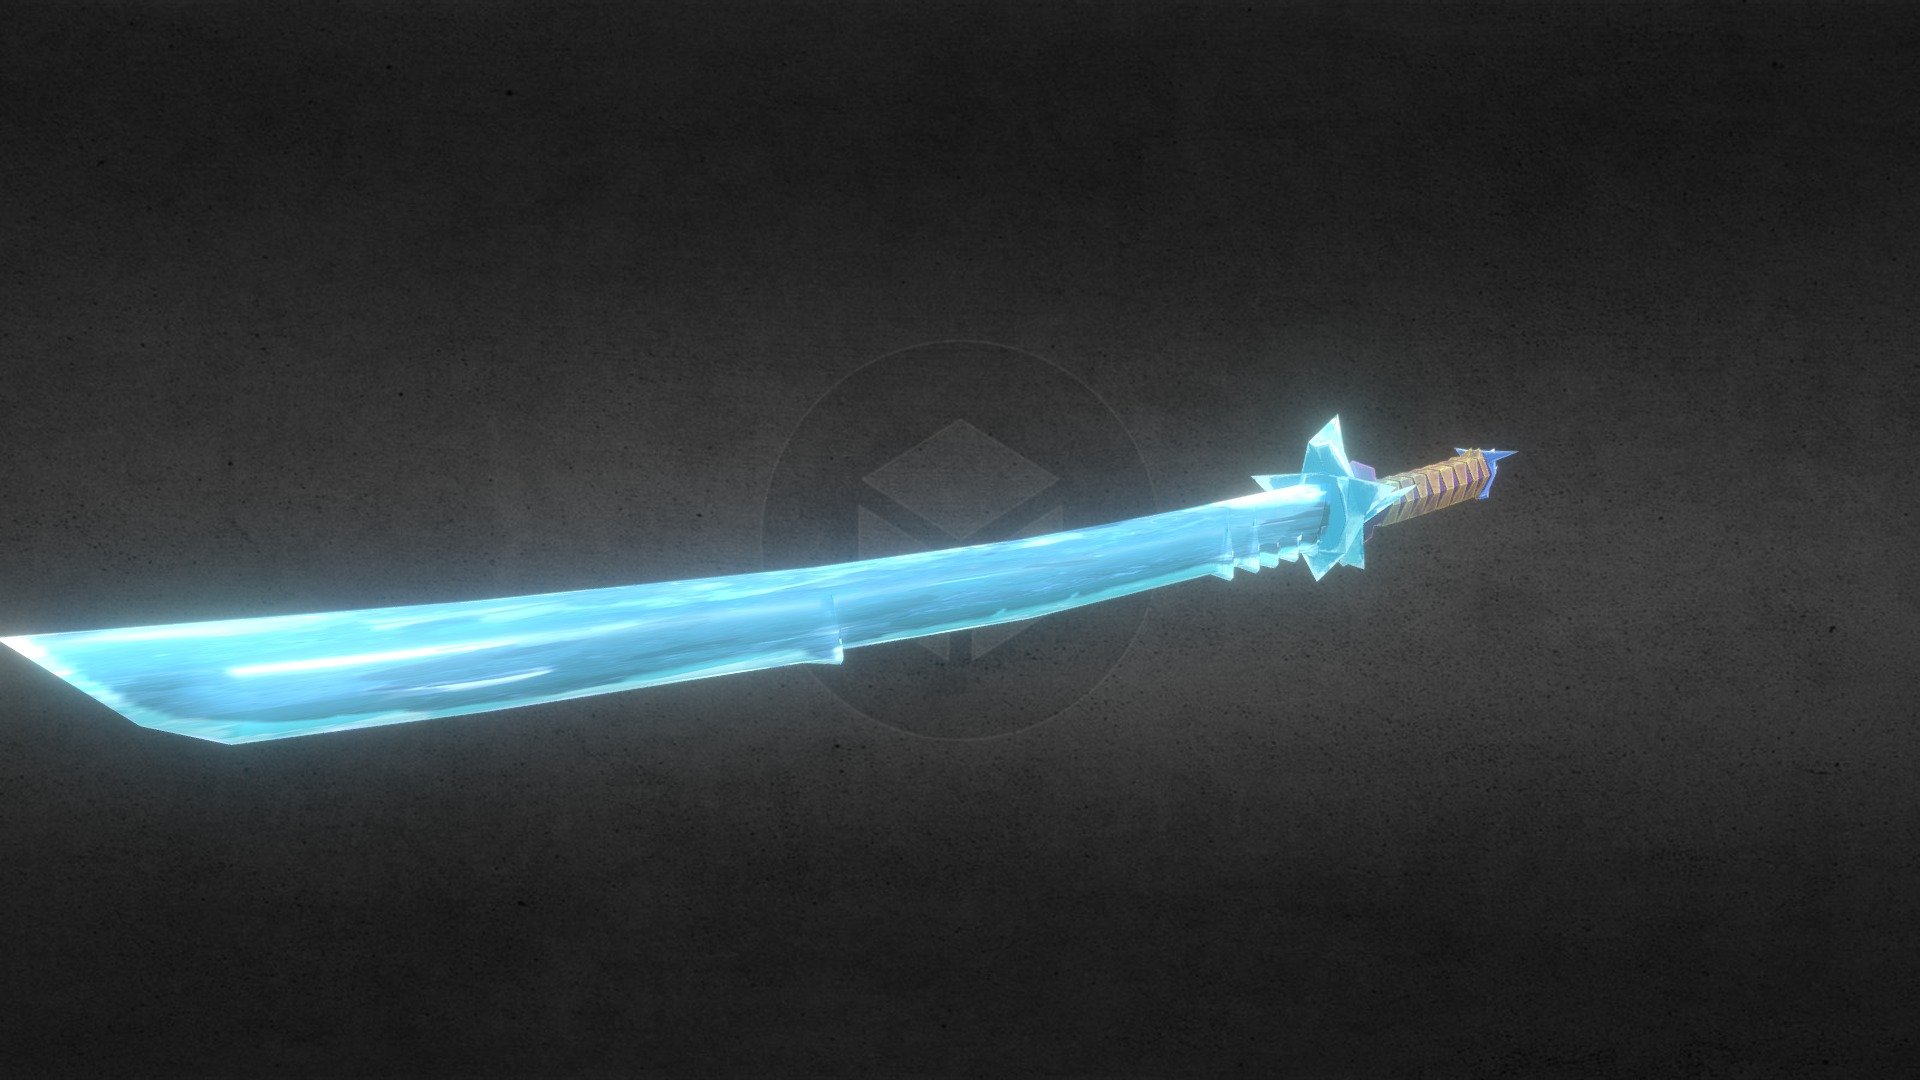 My new Sword asset. It's an Ice Sword. A Sword made out of ice, literally perhaps 3d model